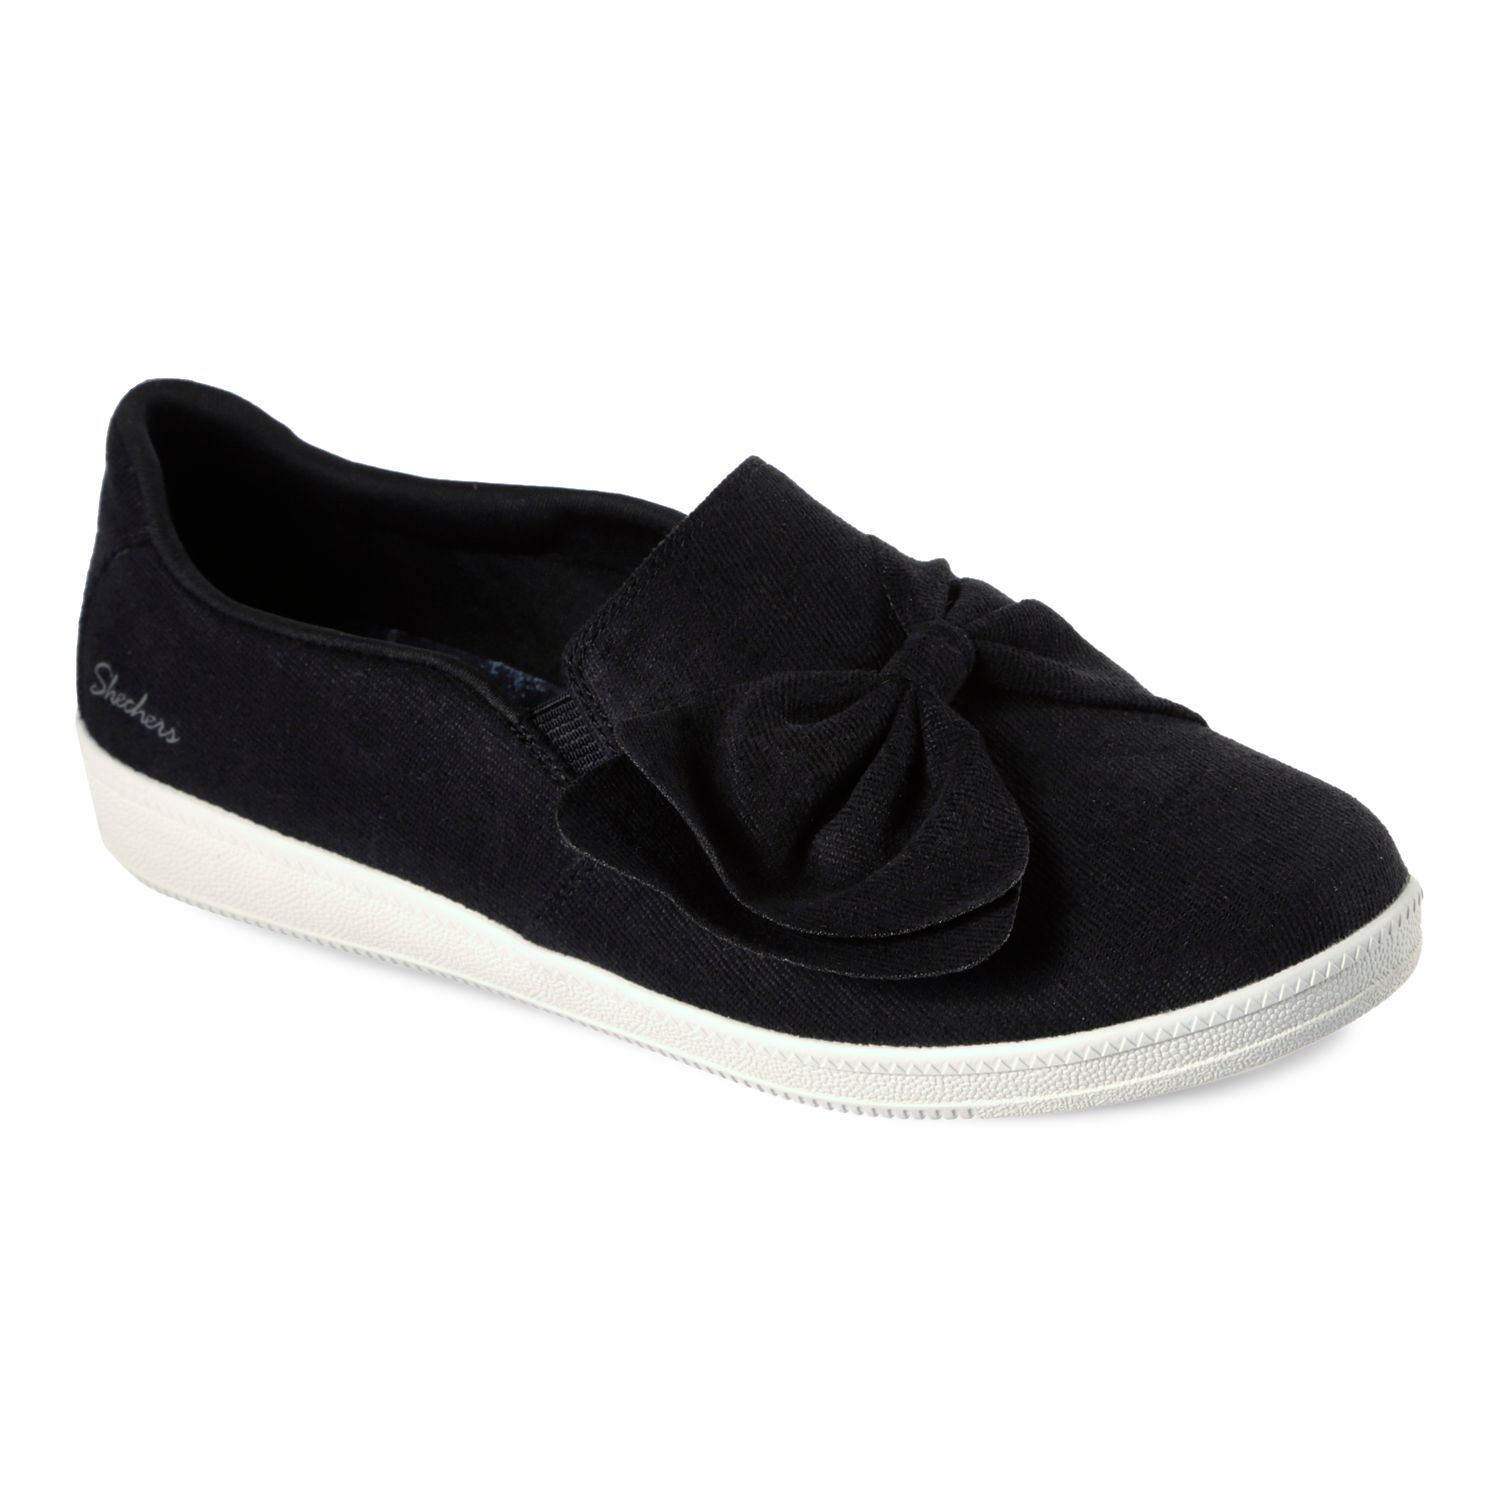 Skechers Madison Ave - My Town Women's 